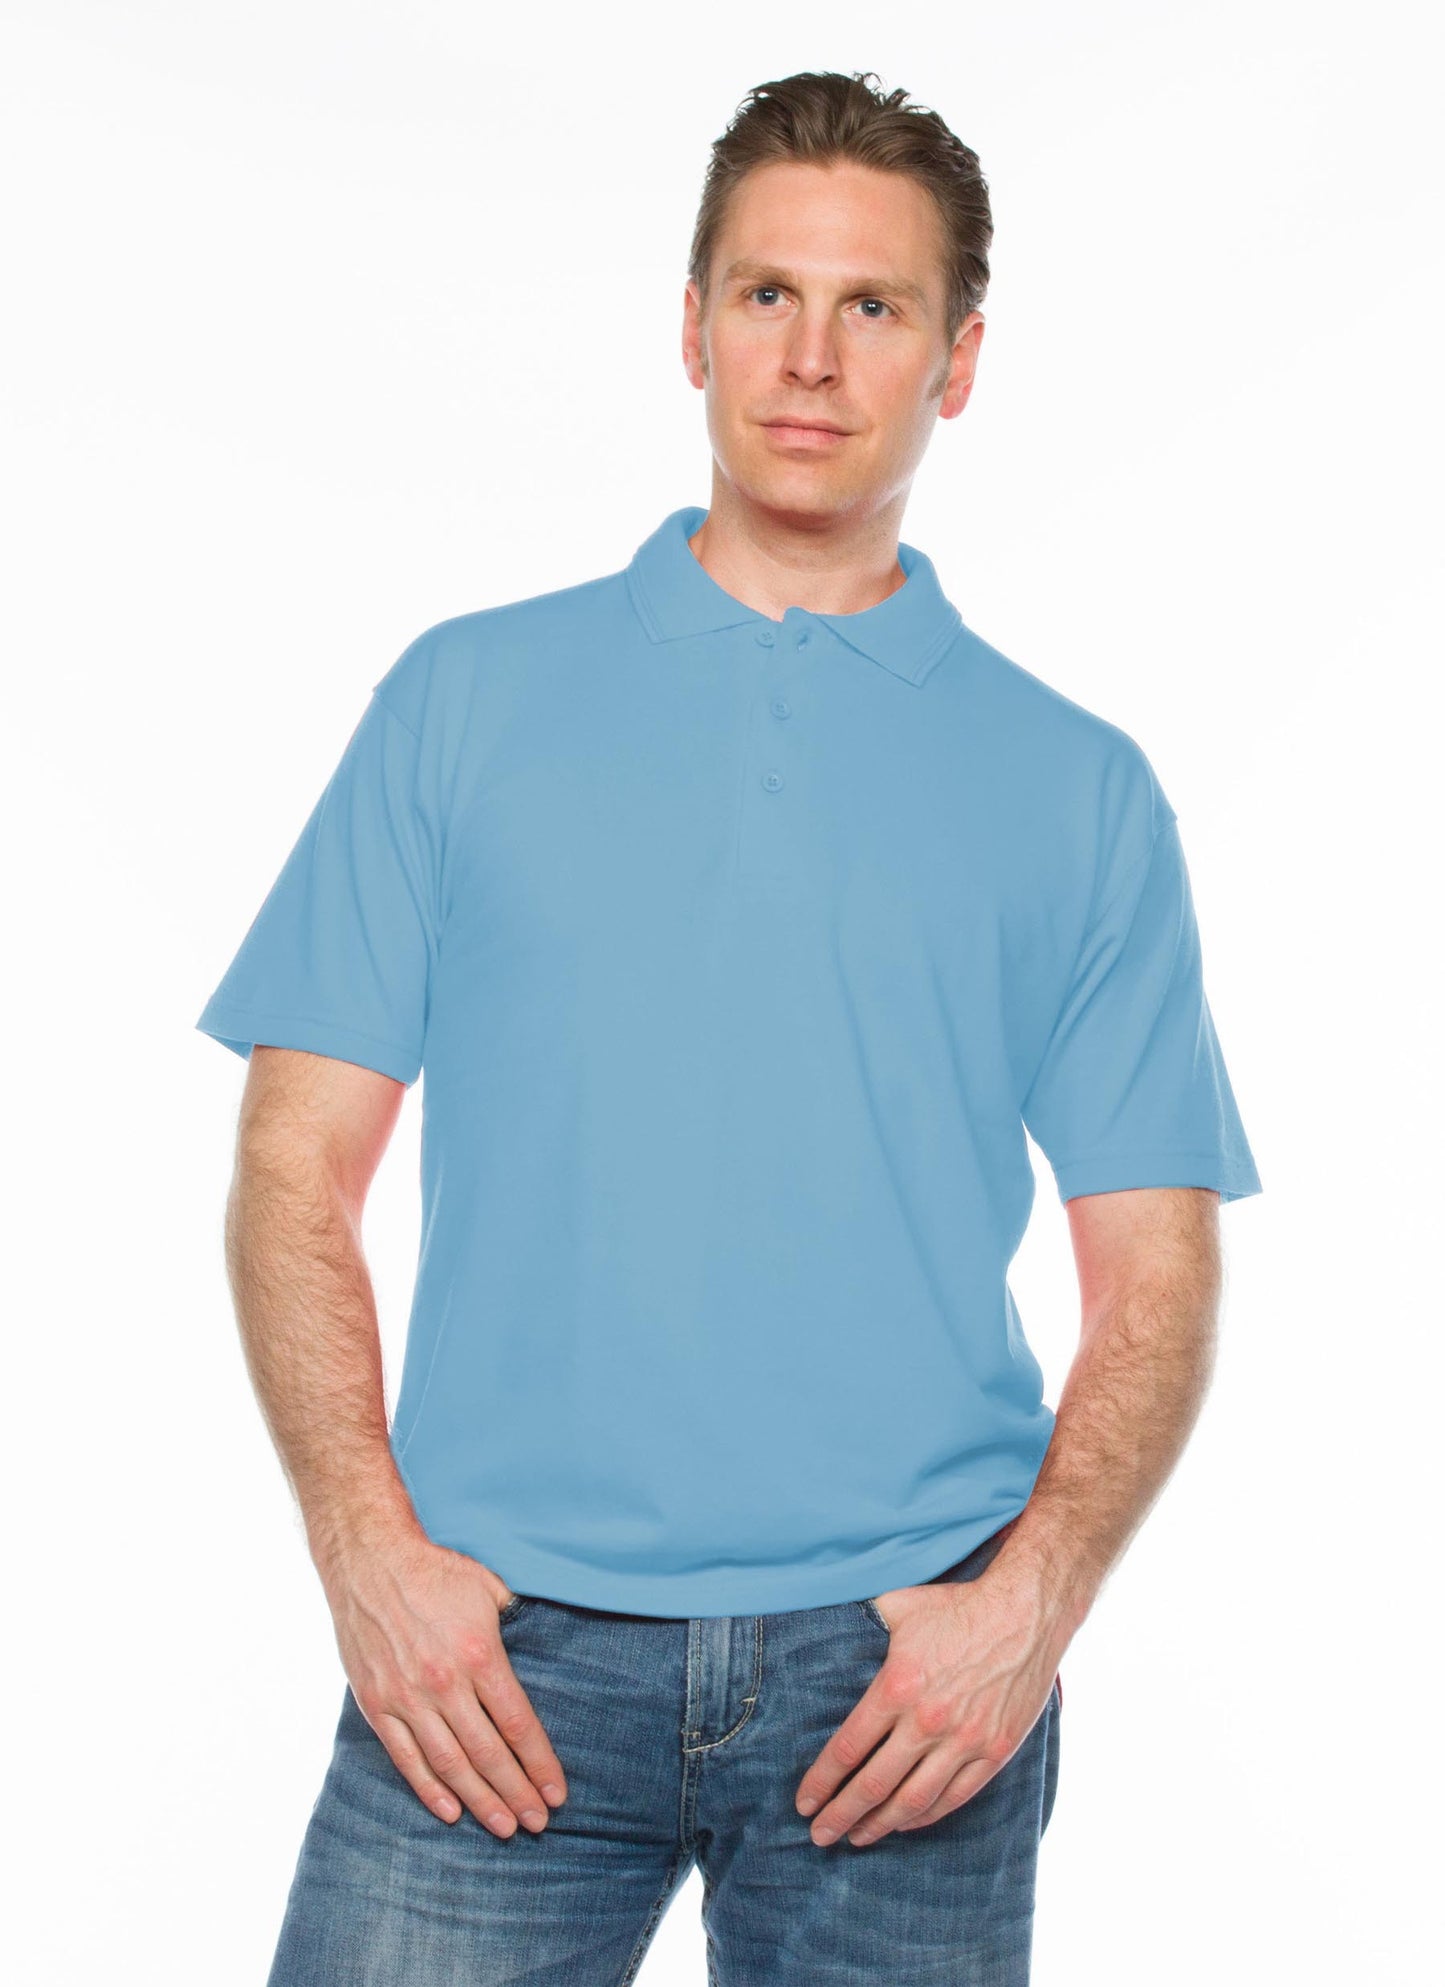 Men's Classic Polo Shirt with Full Side Zip Closure (4252)